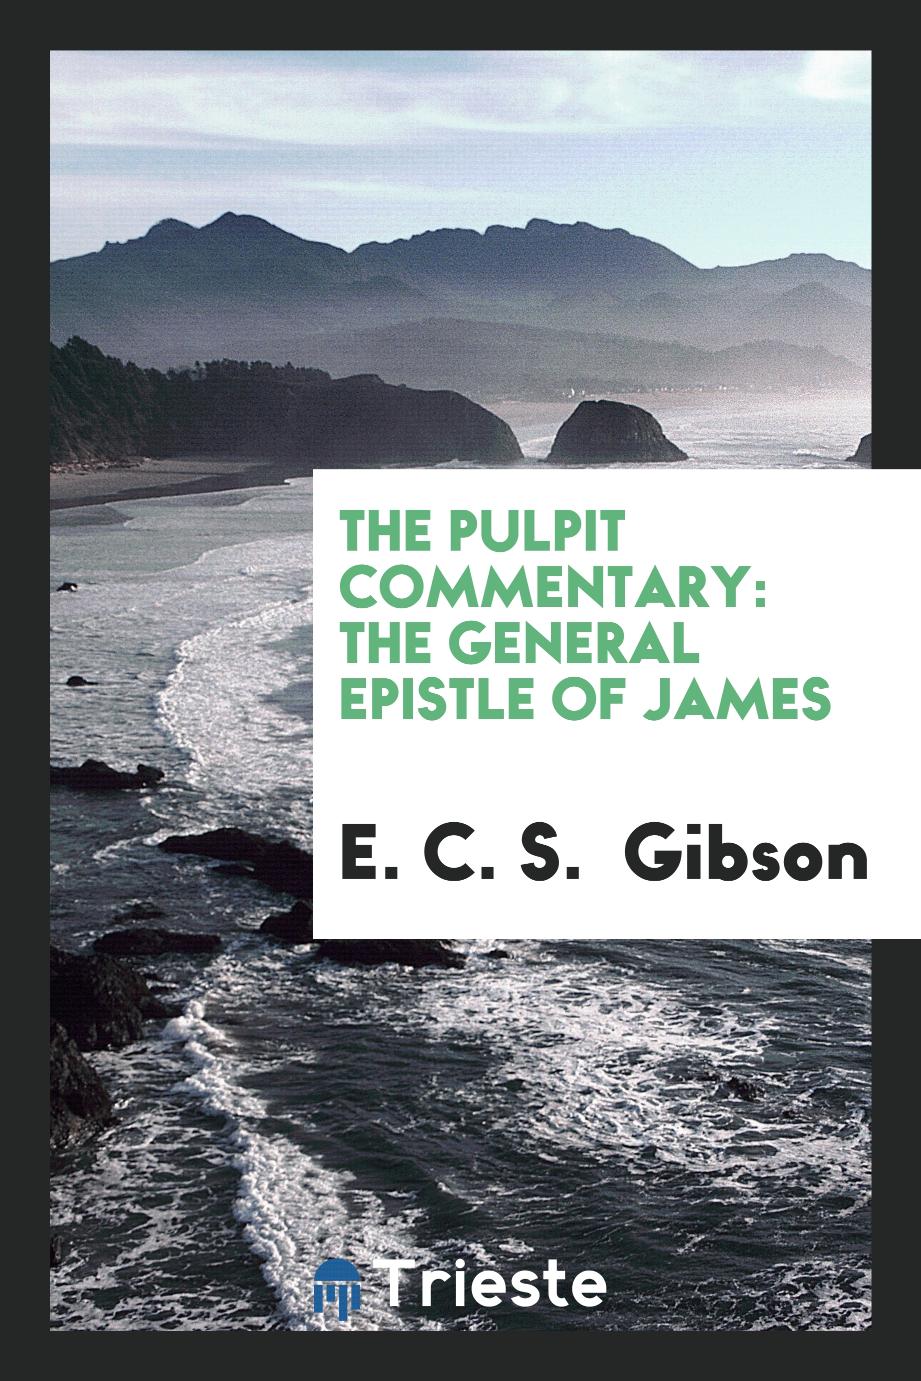 The Pulpit Commentary: The General Epistle of James